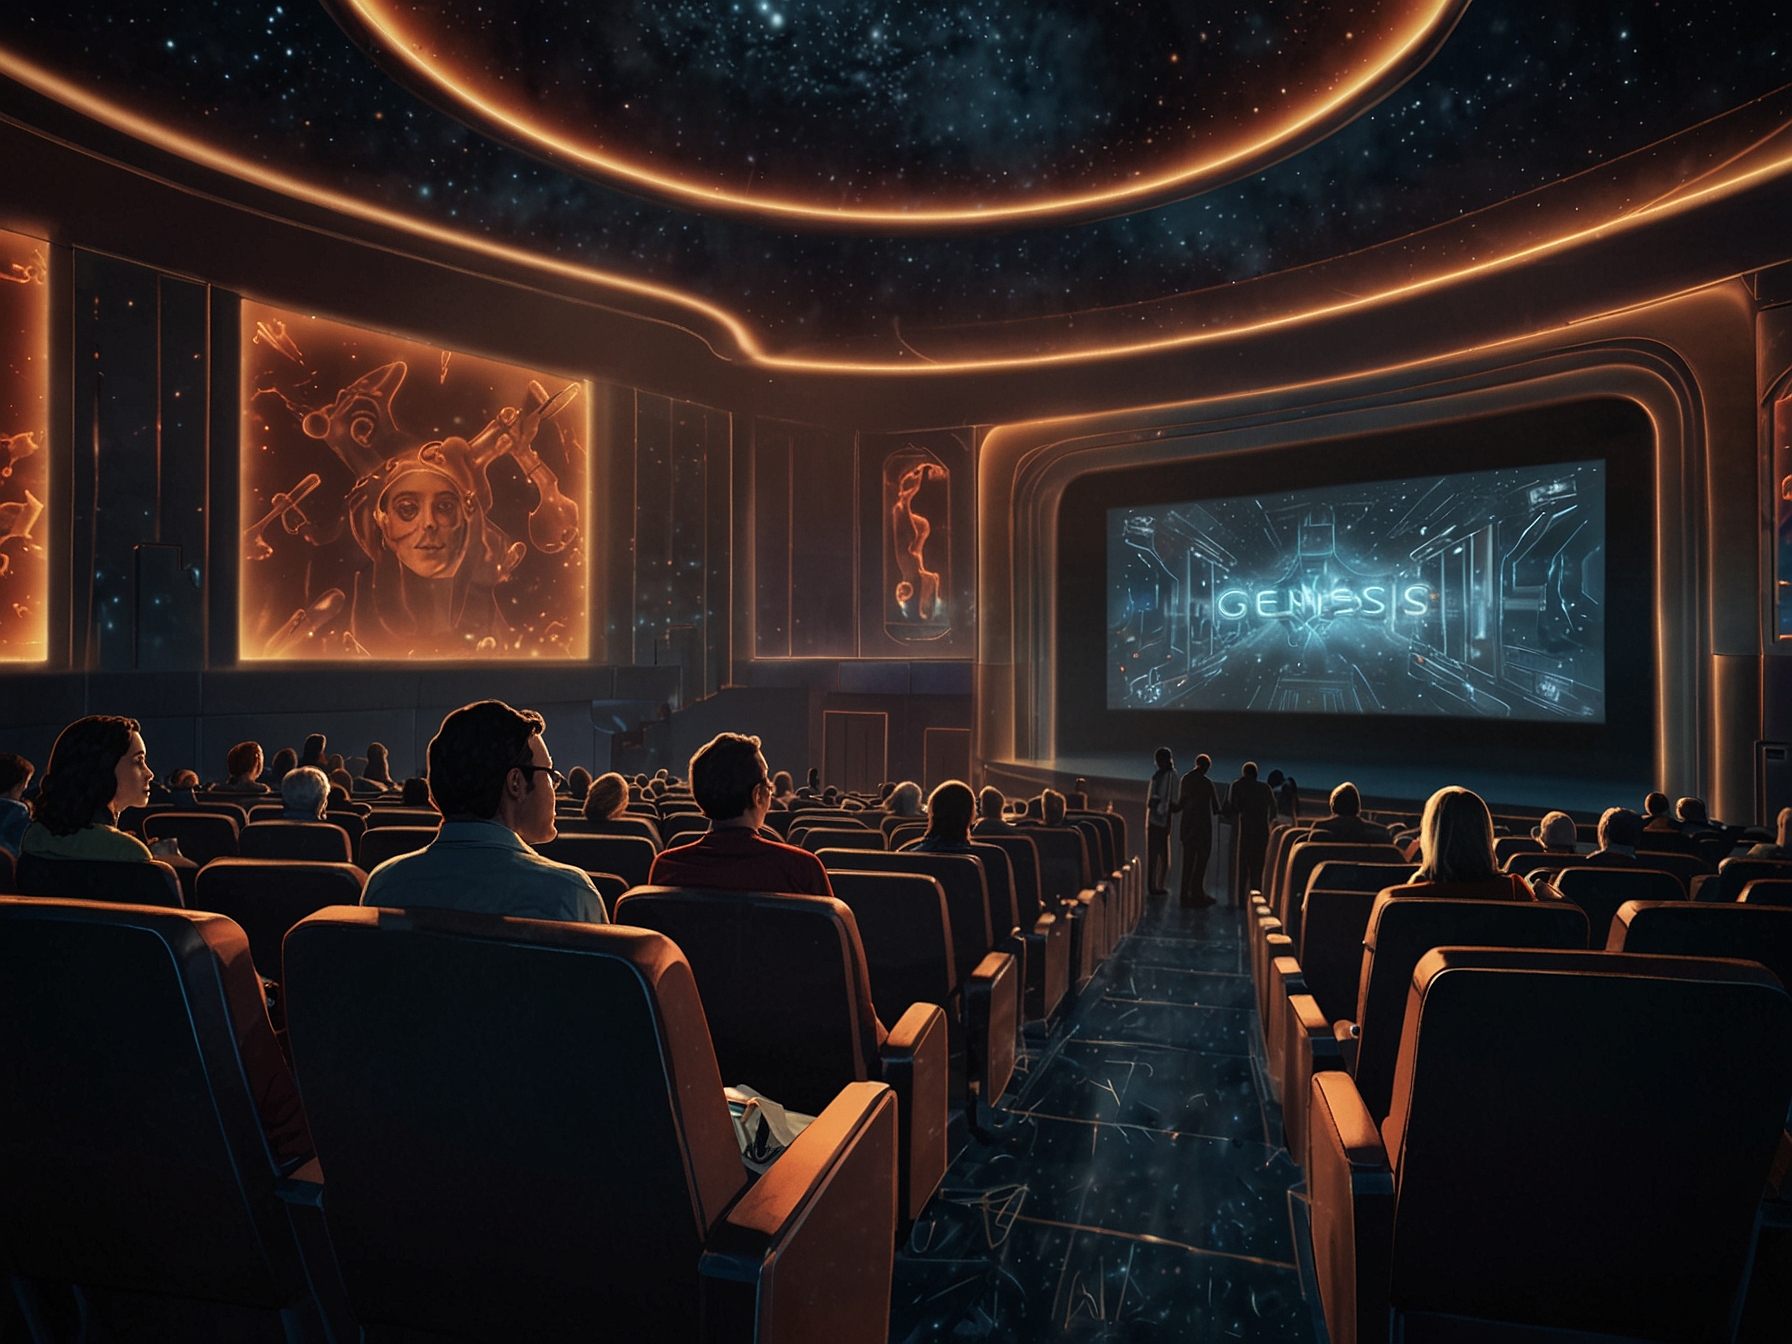 A futuristic movie theater screening 'Genesis Unbound,' the first film written entirely by artificial intelligence, sparking debates about the future of human writers in Hollywood.